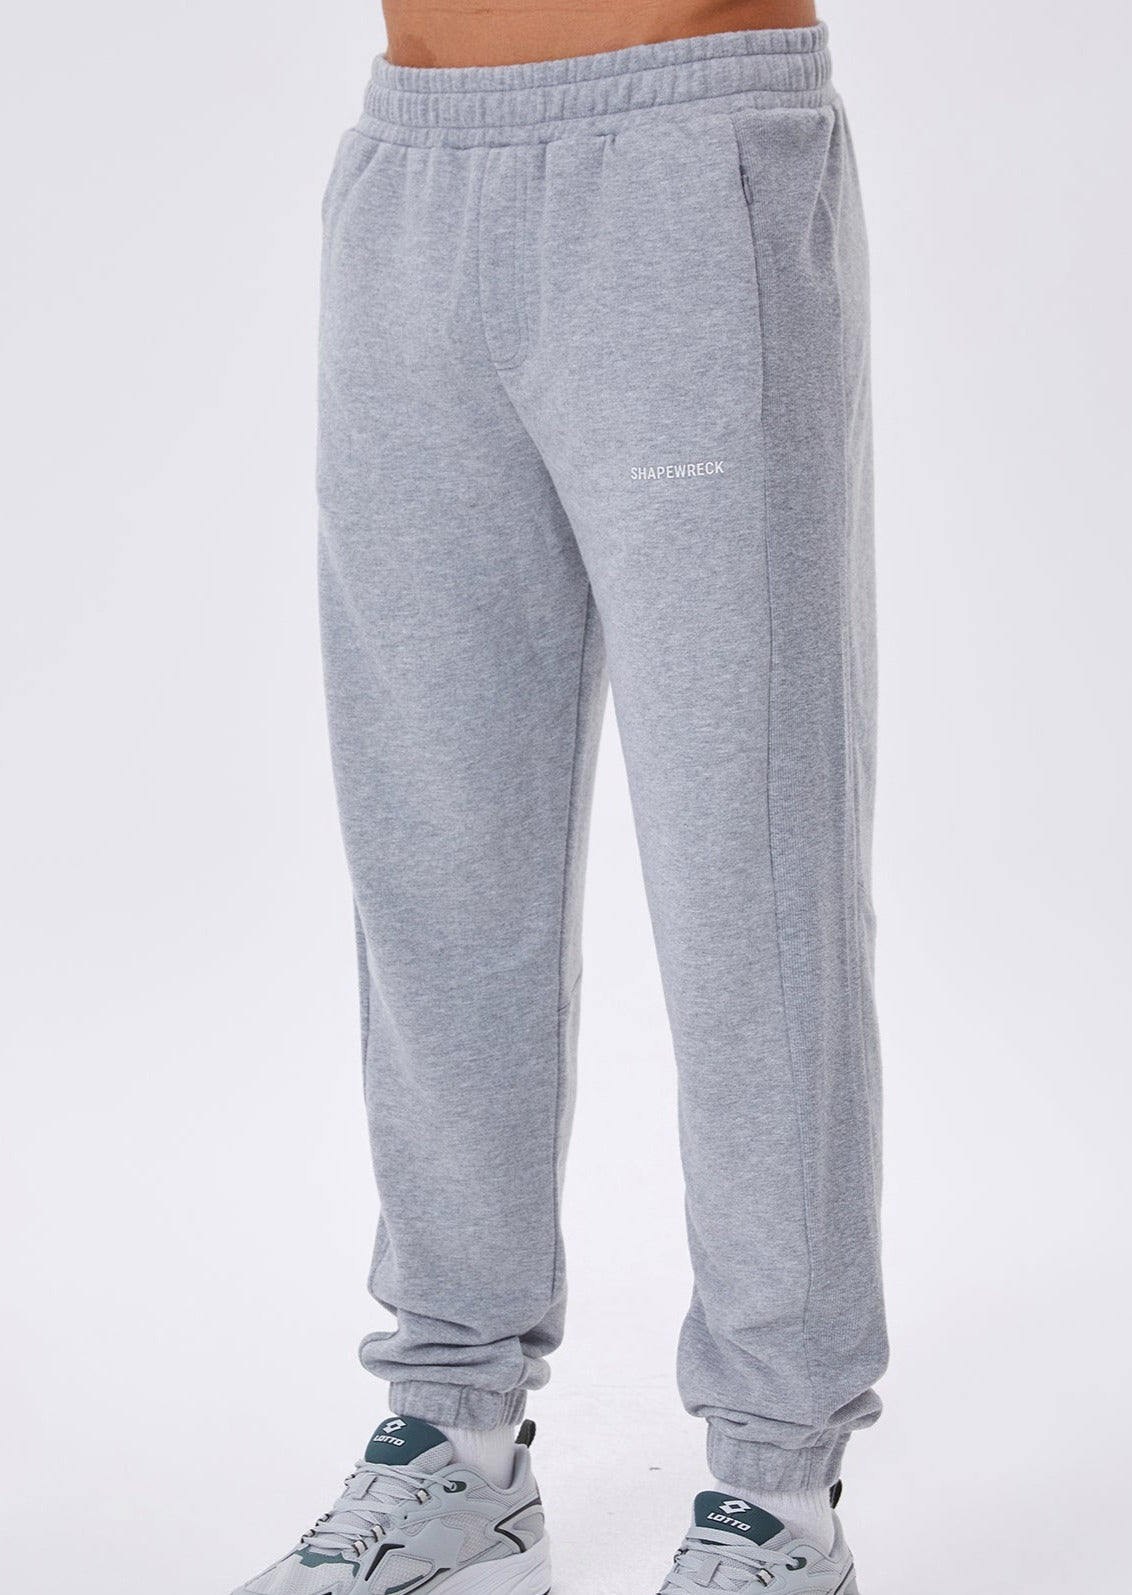 RELAXED FIT Sweatpant PRIMARY JOGGER - WINTER GREY